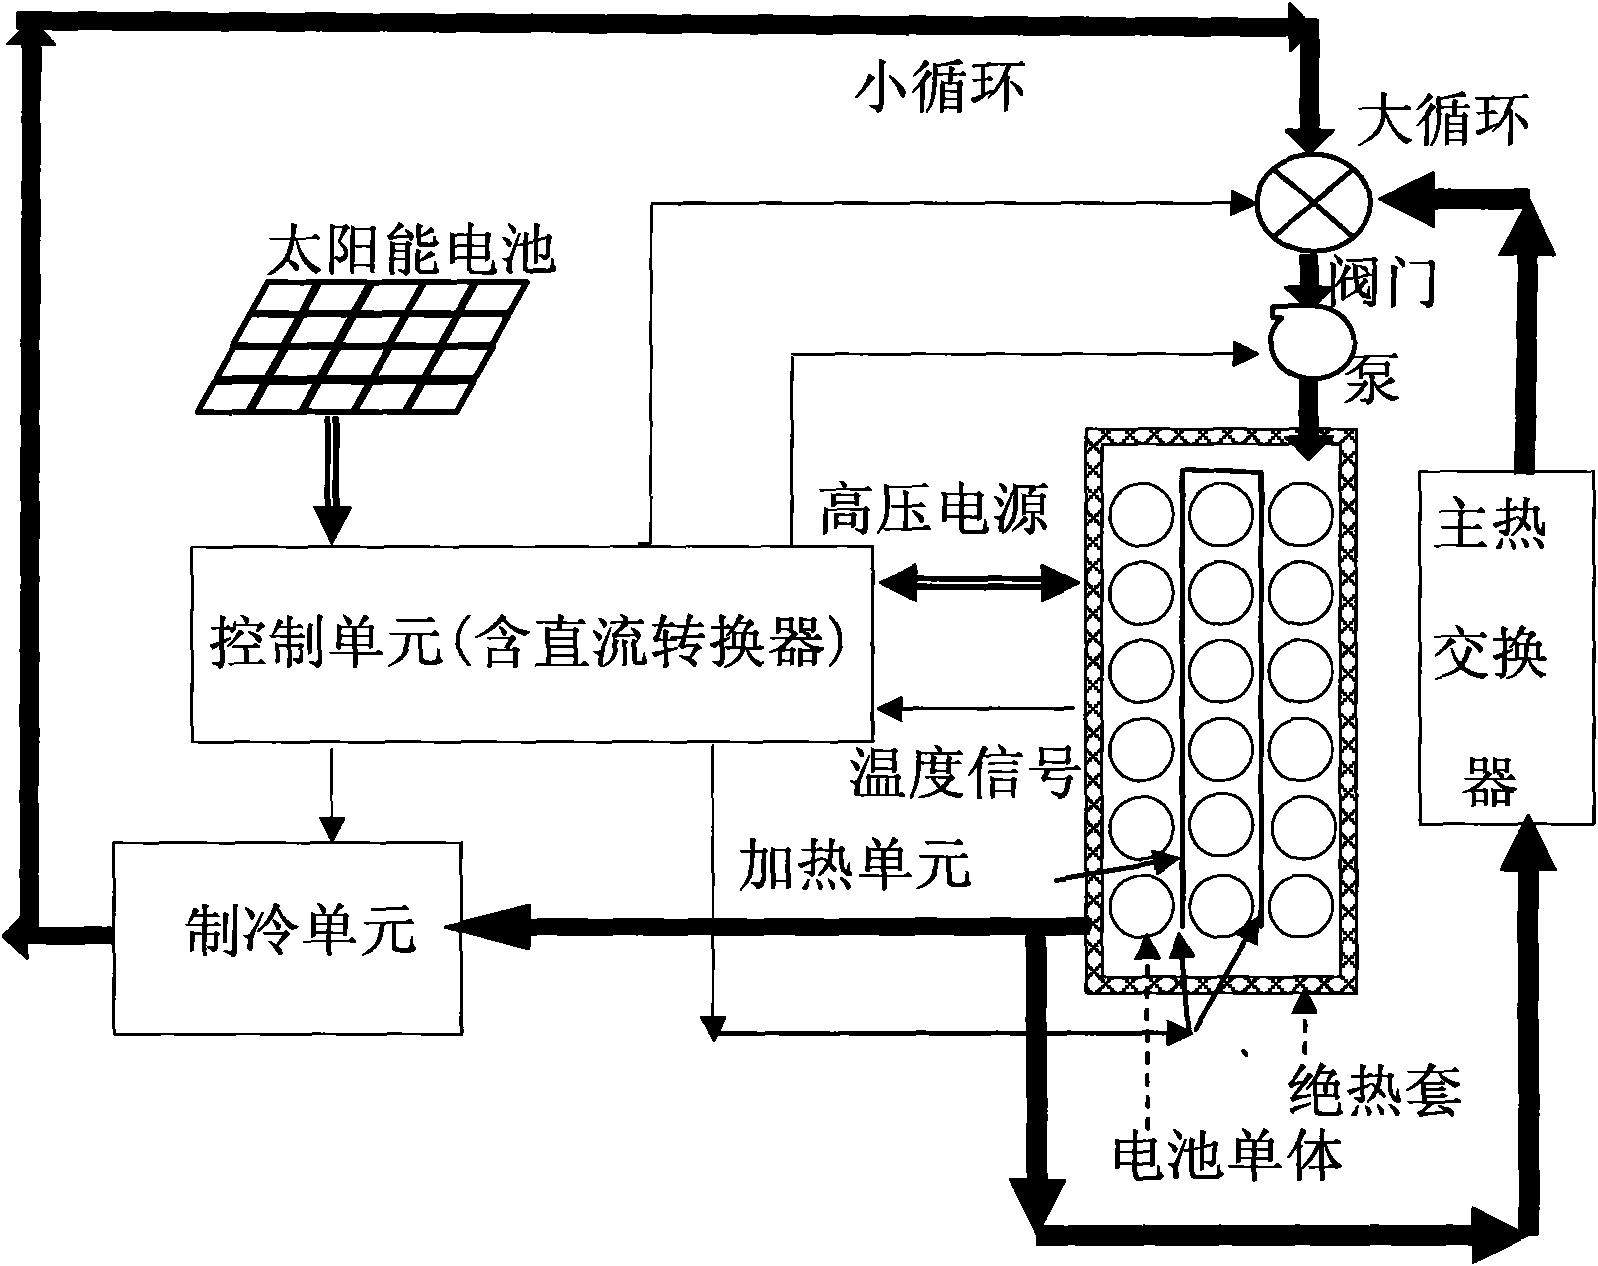 Automobile battery thermal management system and working method thereof